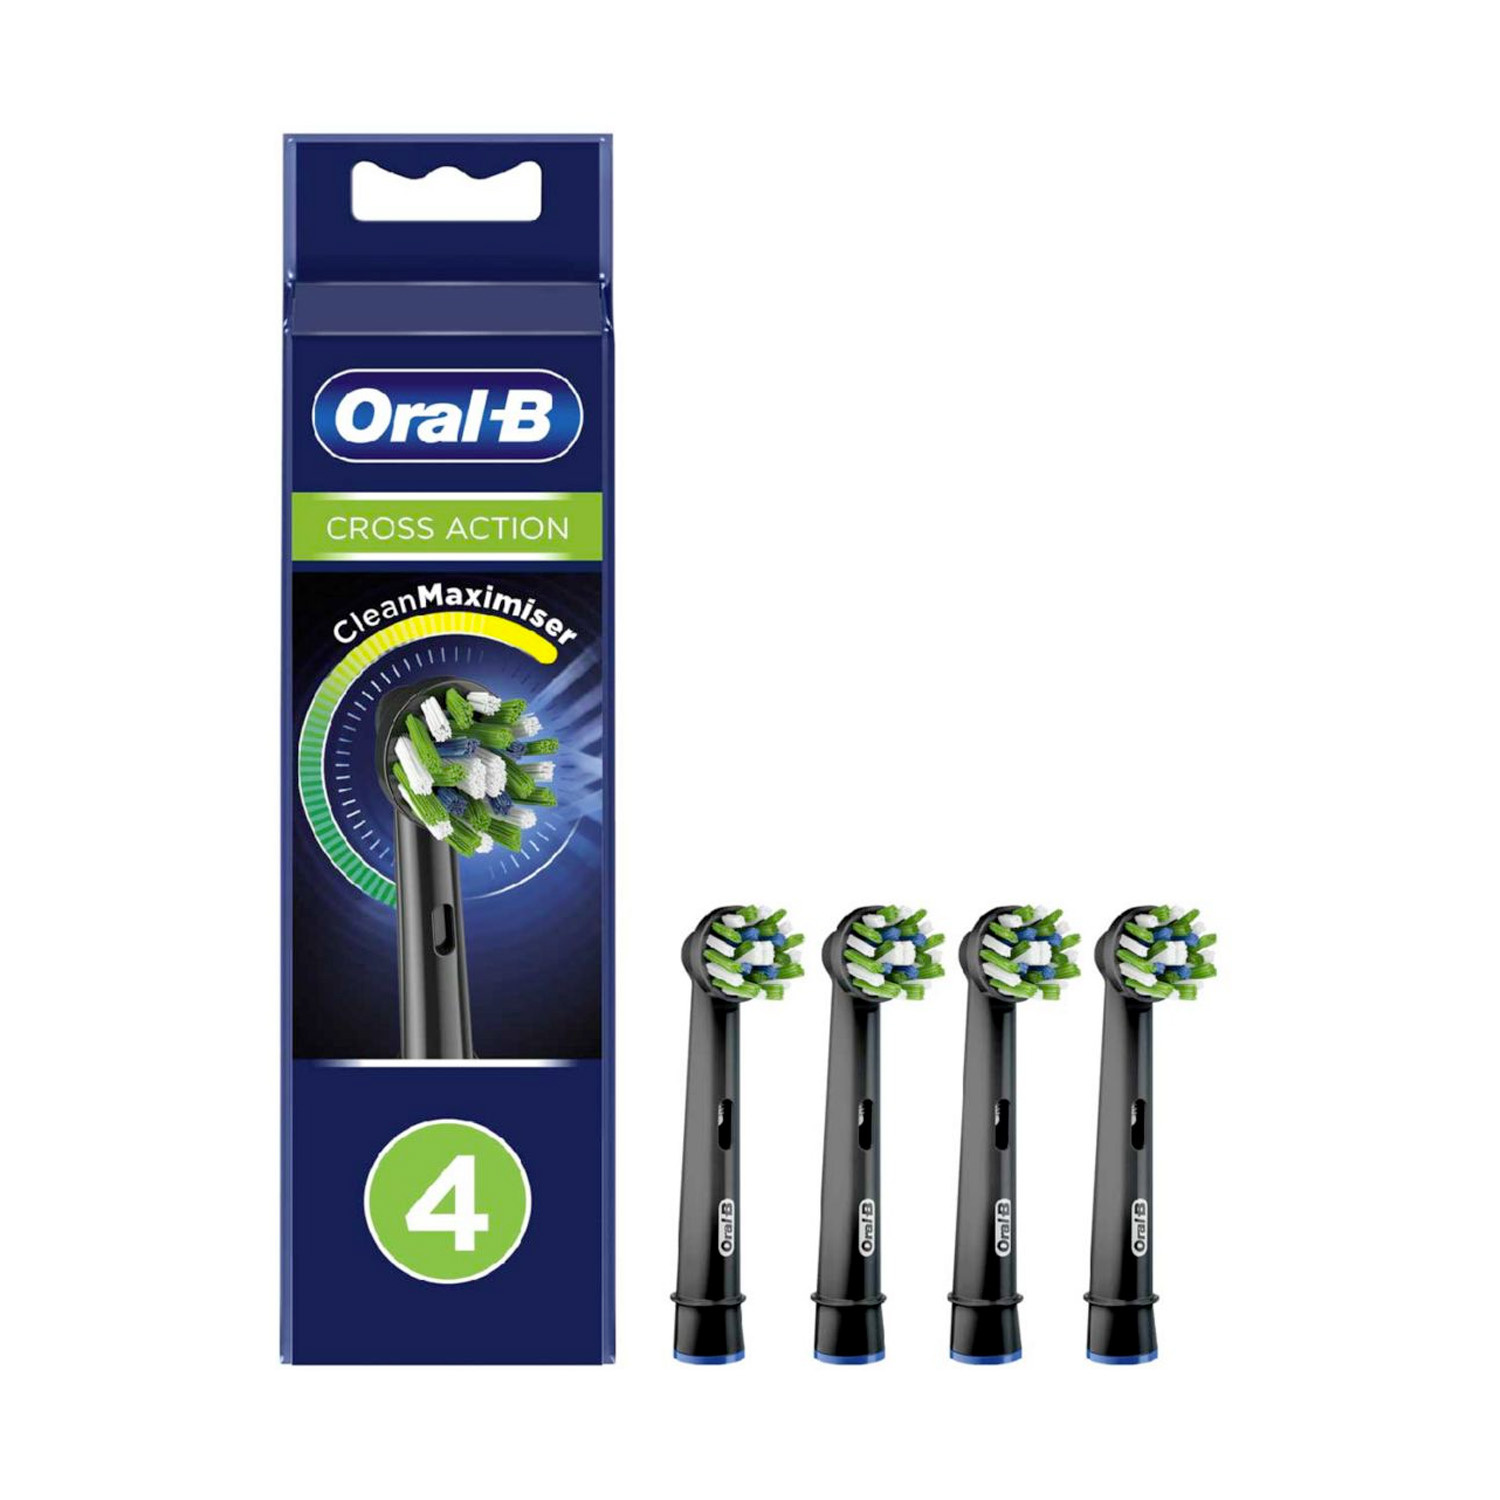 Oral-B CrossAction Toothbrush Head with CleanMaximiser Technology Black Edition